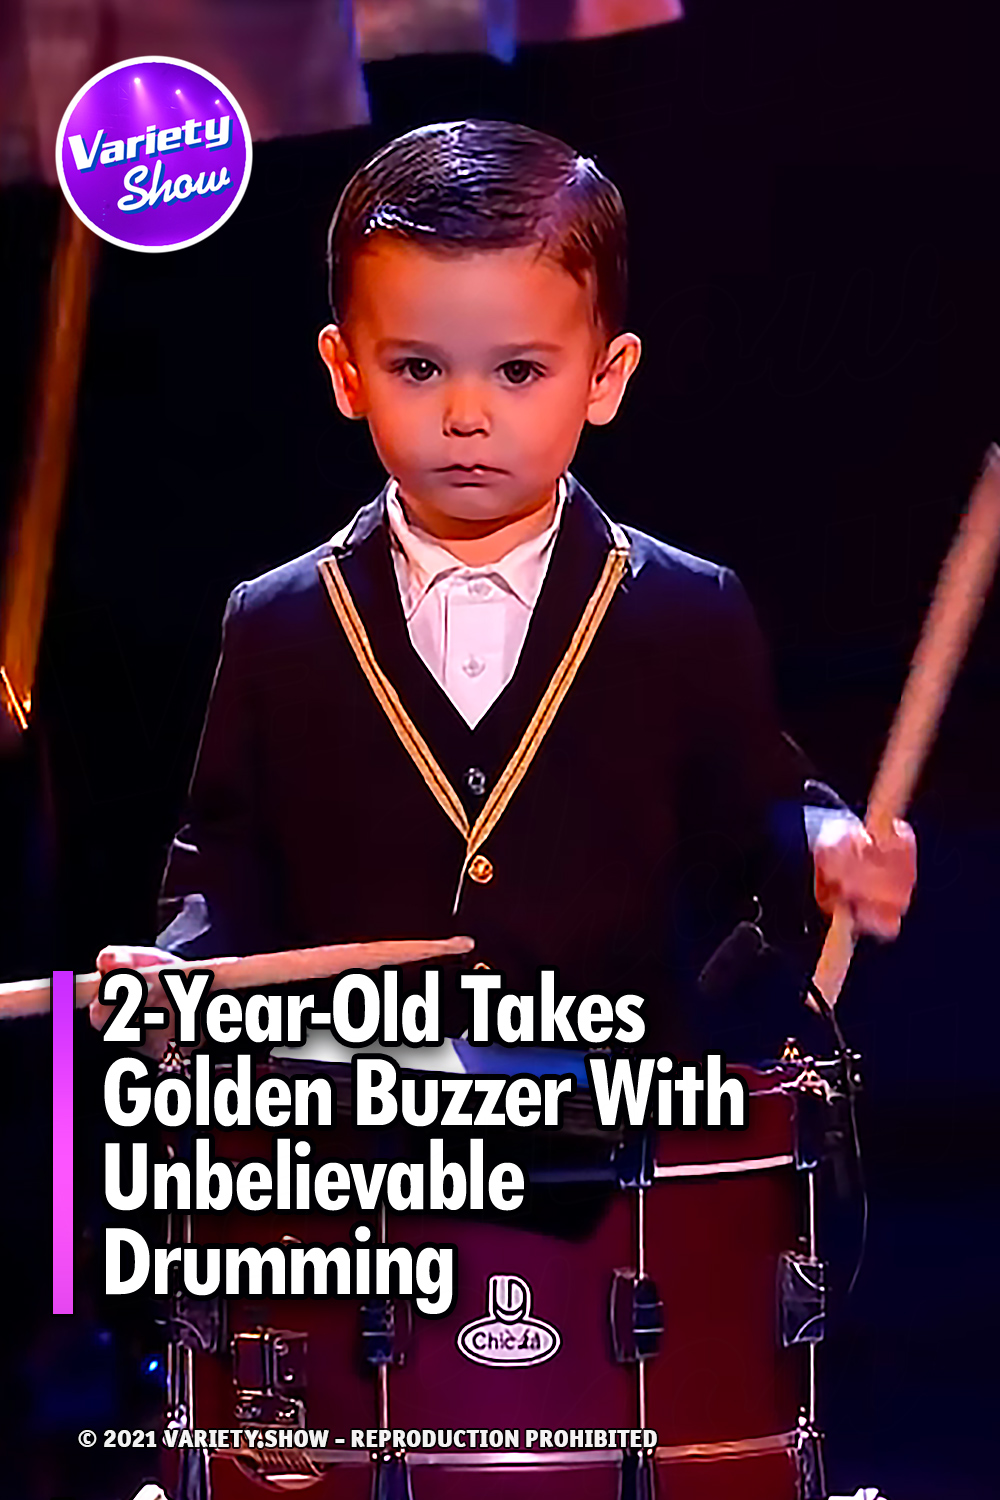 2-Year-Old Takes Golden Buzzer With Unbelievable Drumming